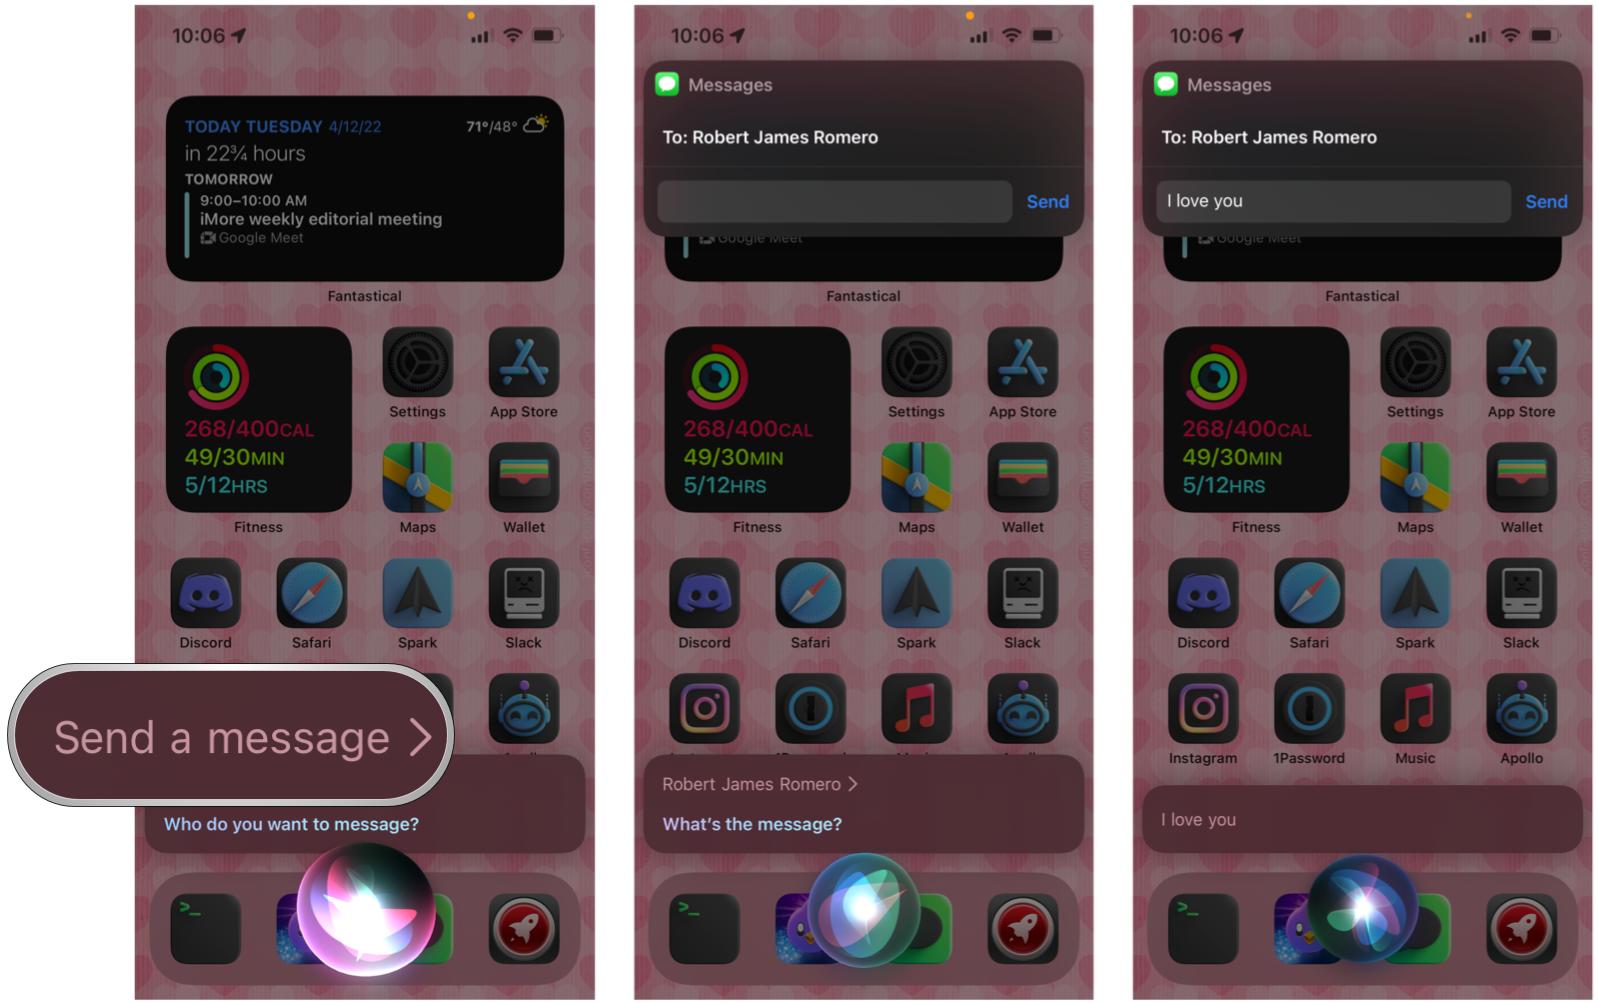 Send message with Siri on iPhone: Activate Siri, say Send Message, choose a contact, dictate your message